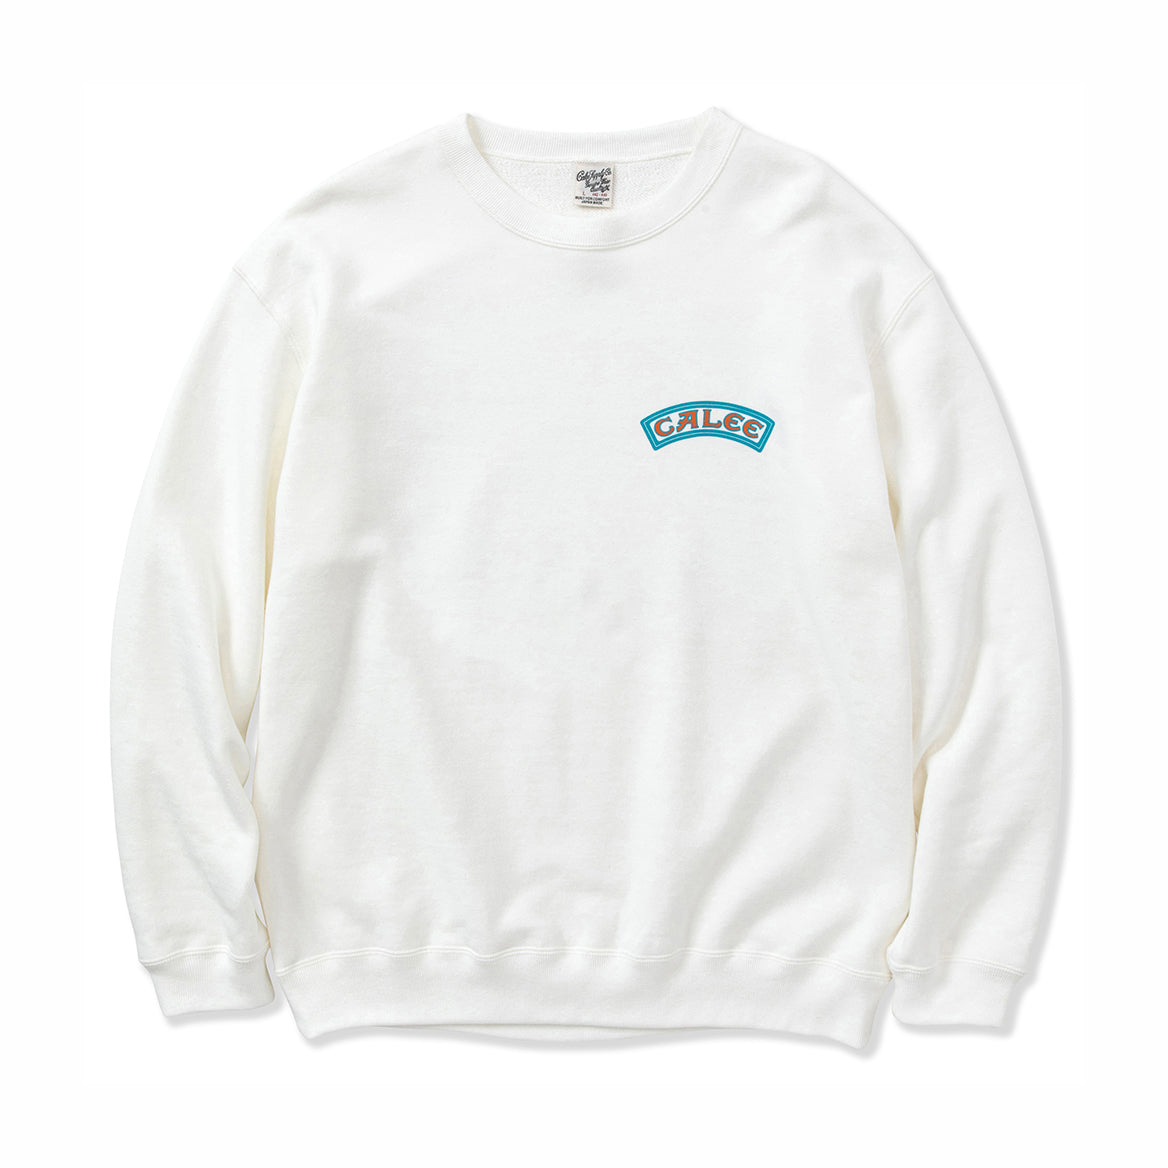 B.L BUNNY CREW NECK SWEAT - calee-official